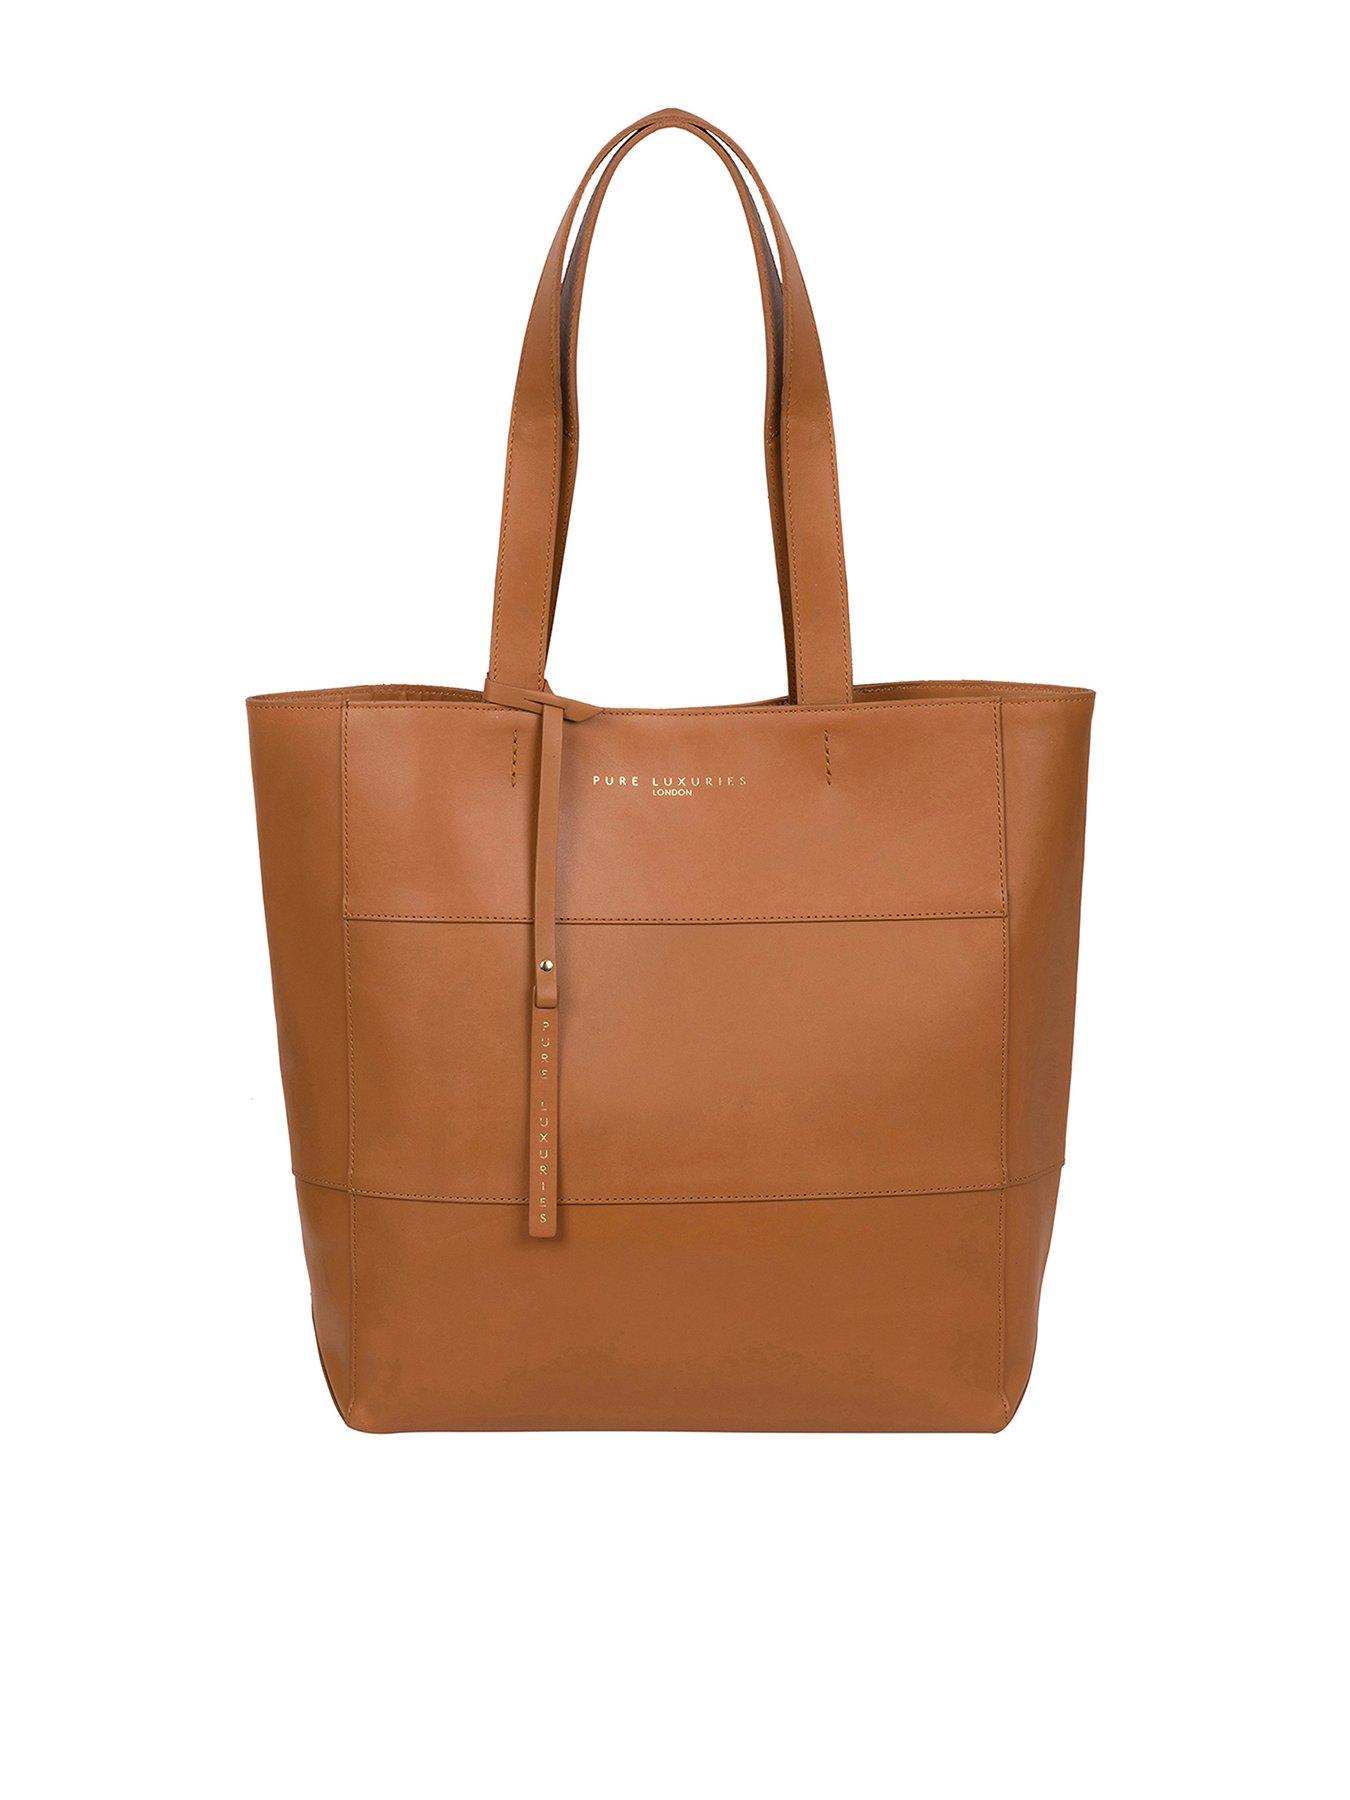 Women Exclusive Ashurst Large Open Top Leather Tote Bag - Tan